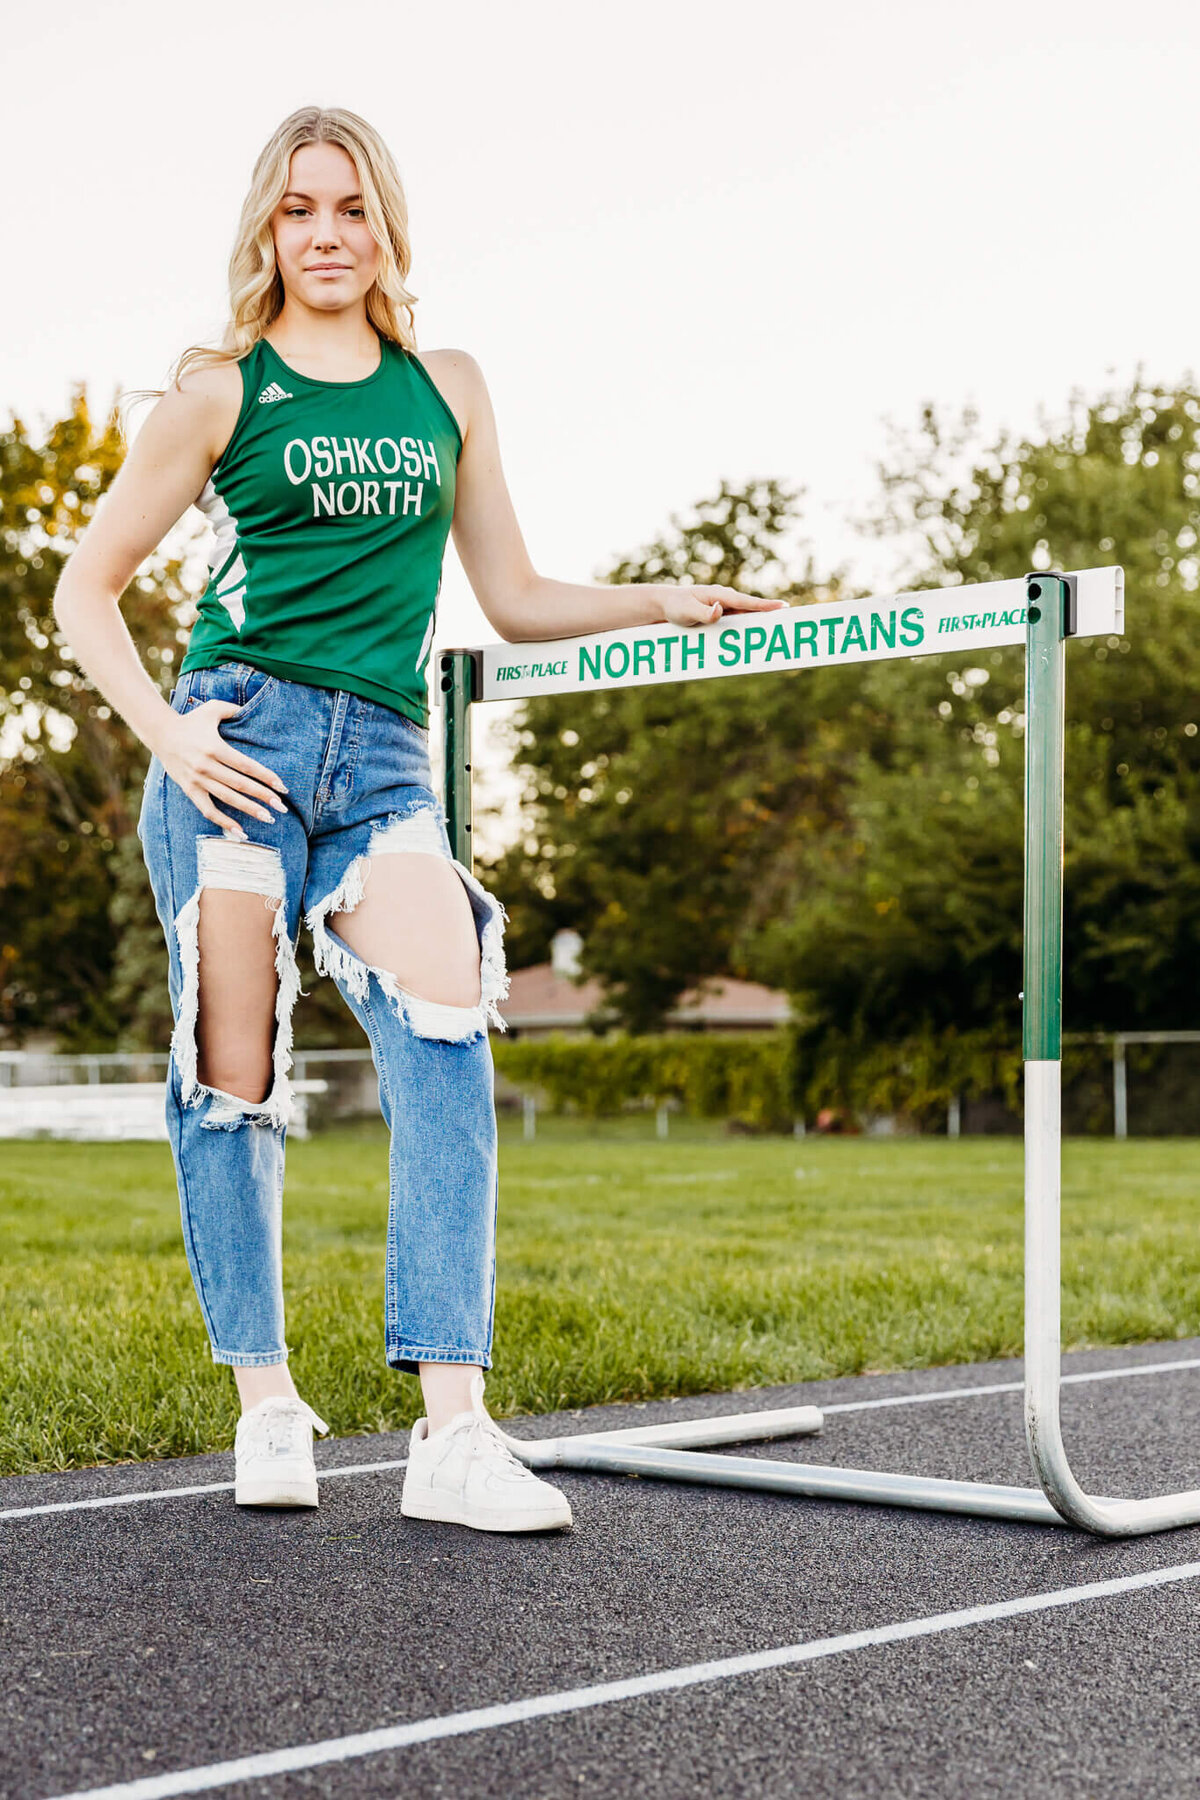 Oshkosh North high school girl leaning against a hurdle while standing on the track at sunset